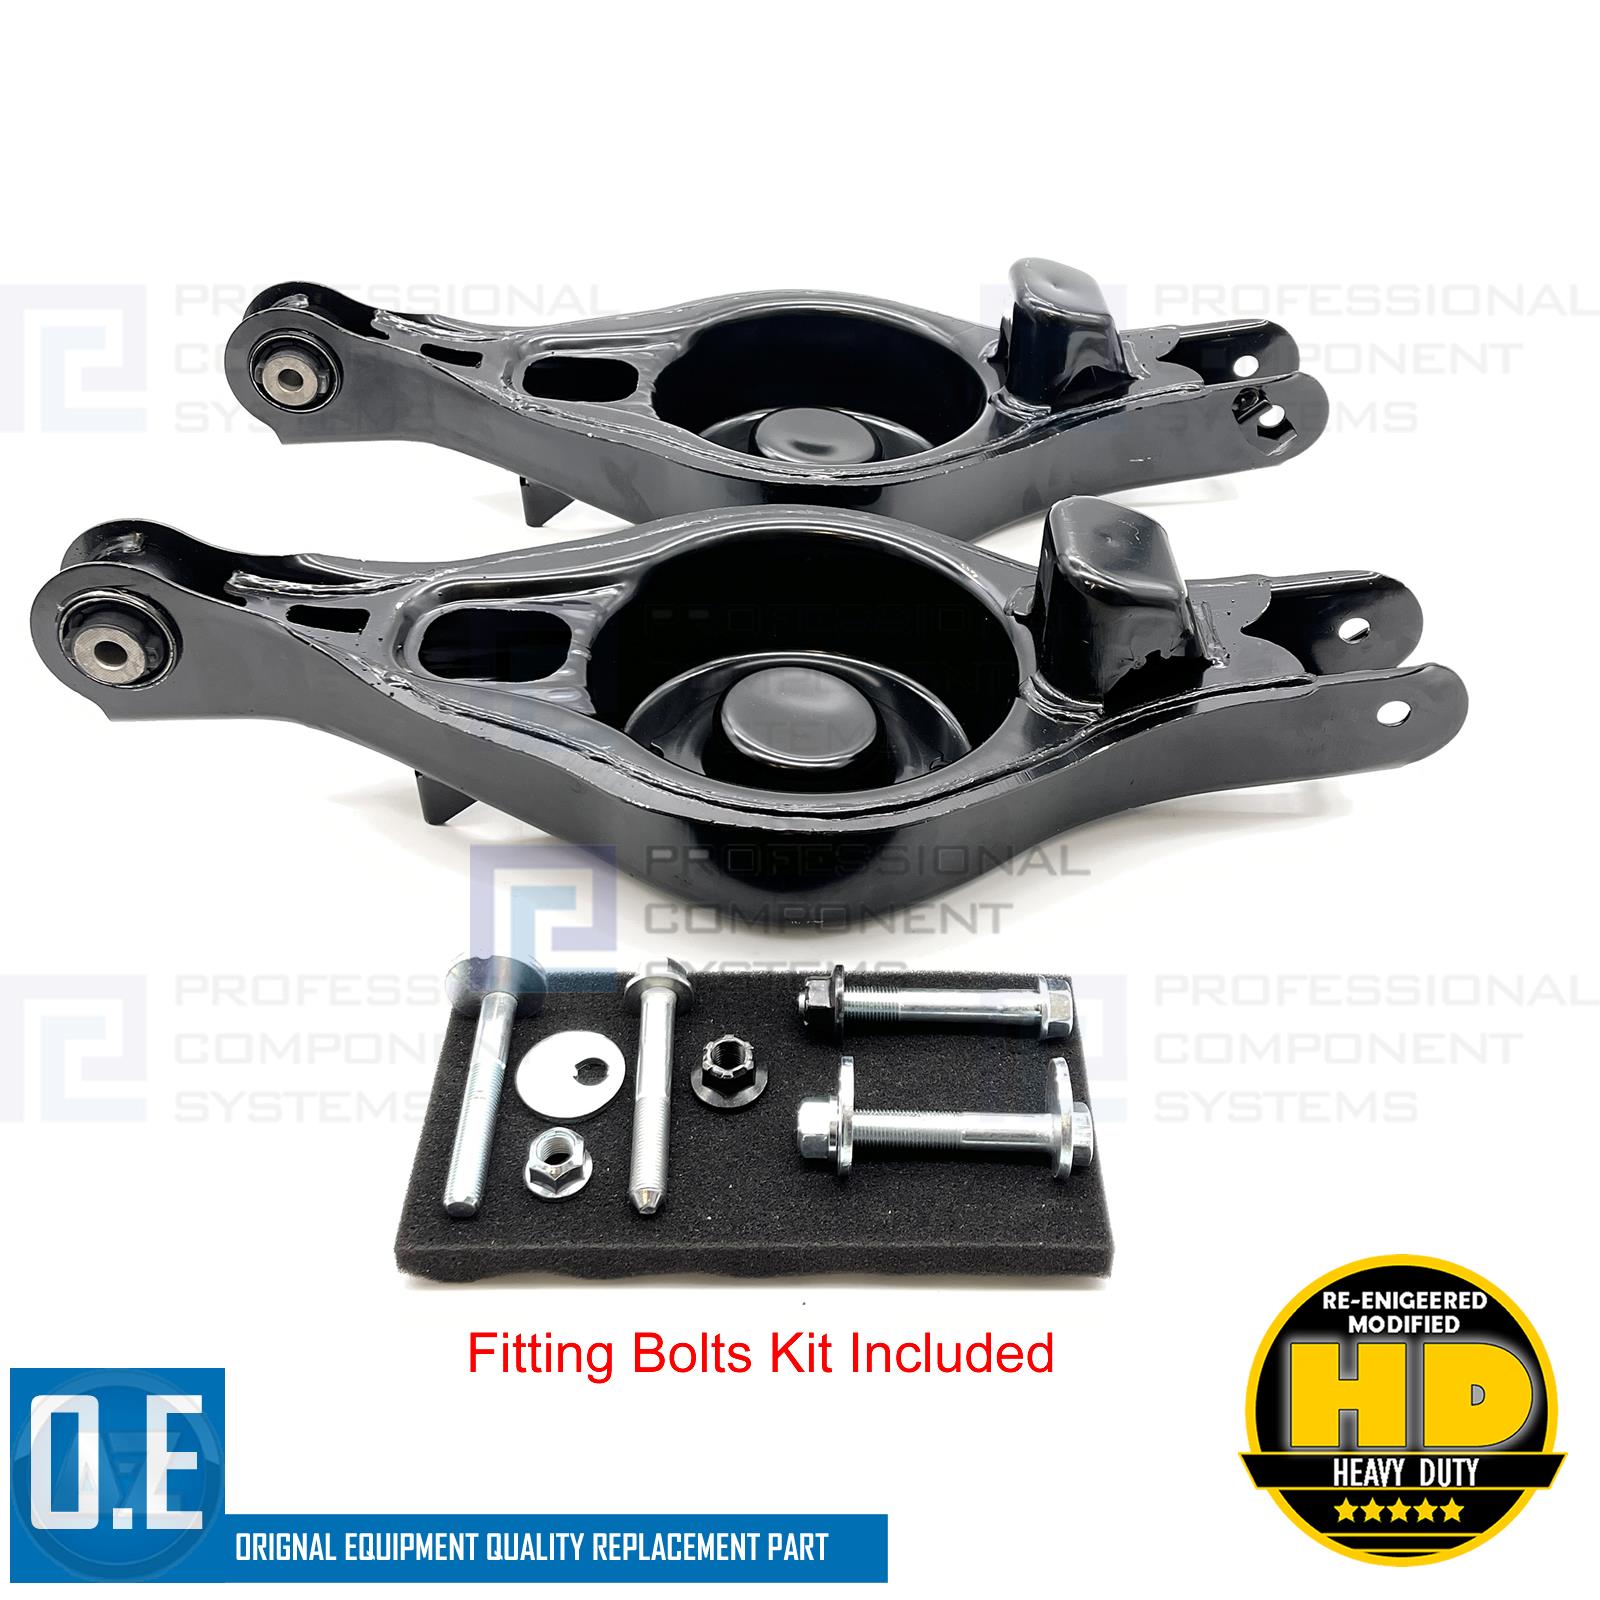 BUSHES GH REAR LEFT 6 LOWER MAZDA | RIGHT KIT SUSPENSION FOR ARMS 07-13 BOLTS NUTS eBay